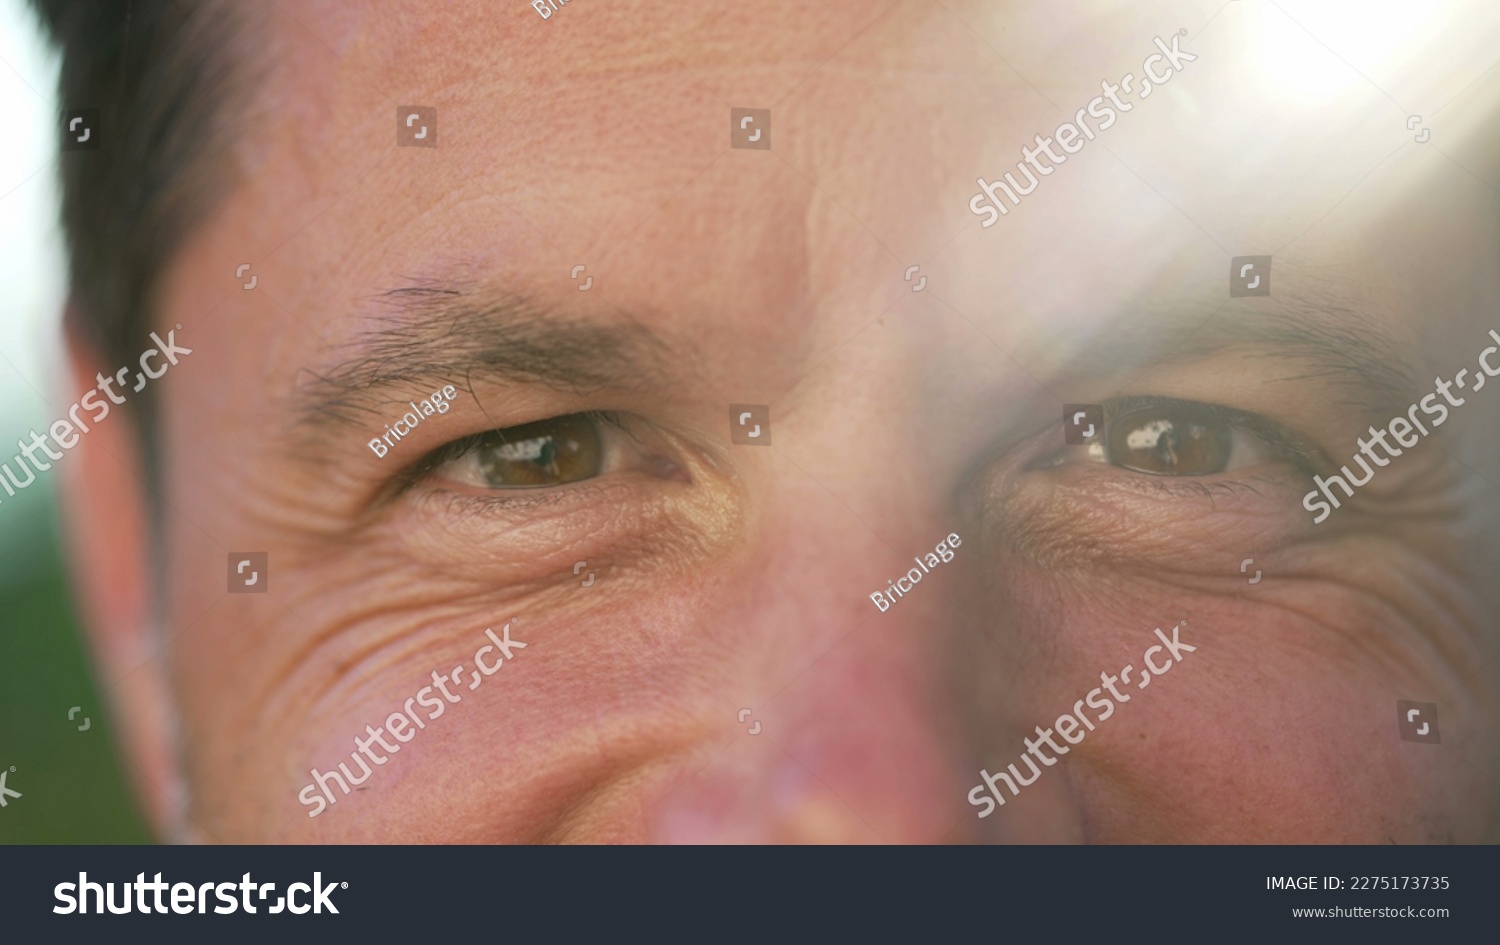 One happy man macro portrait face close up smiling outside with sunlight flare. 40s person with wrinkles closeup of eyes #2275173735